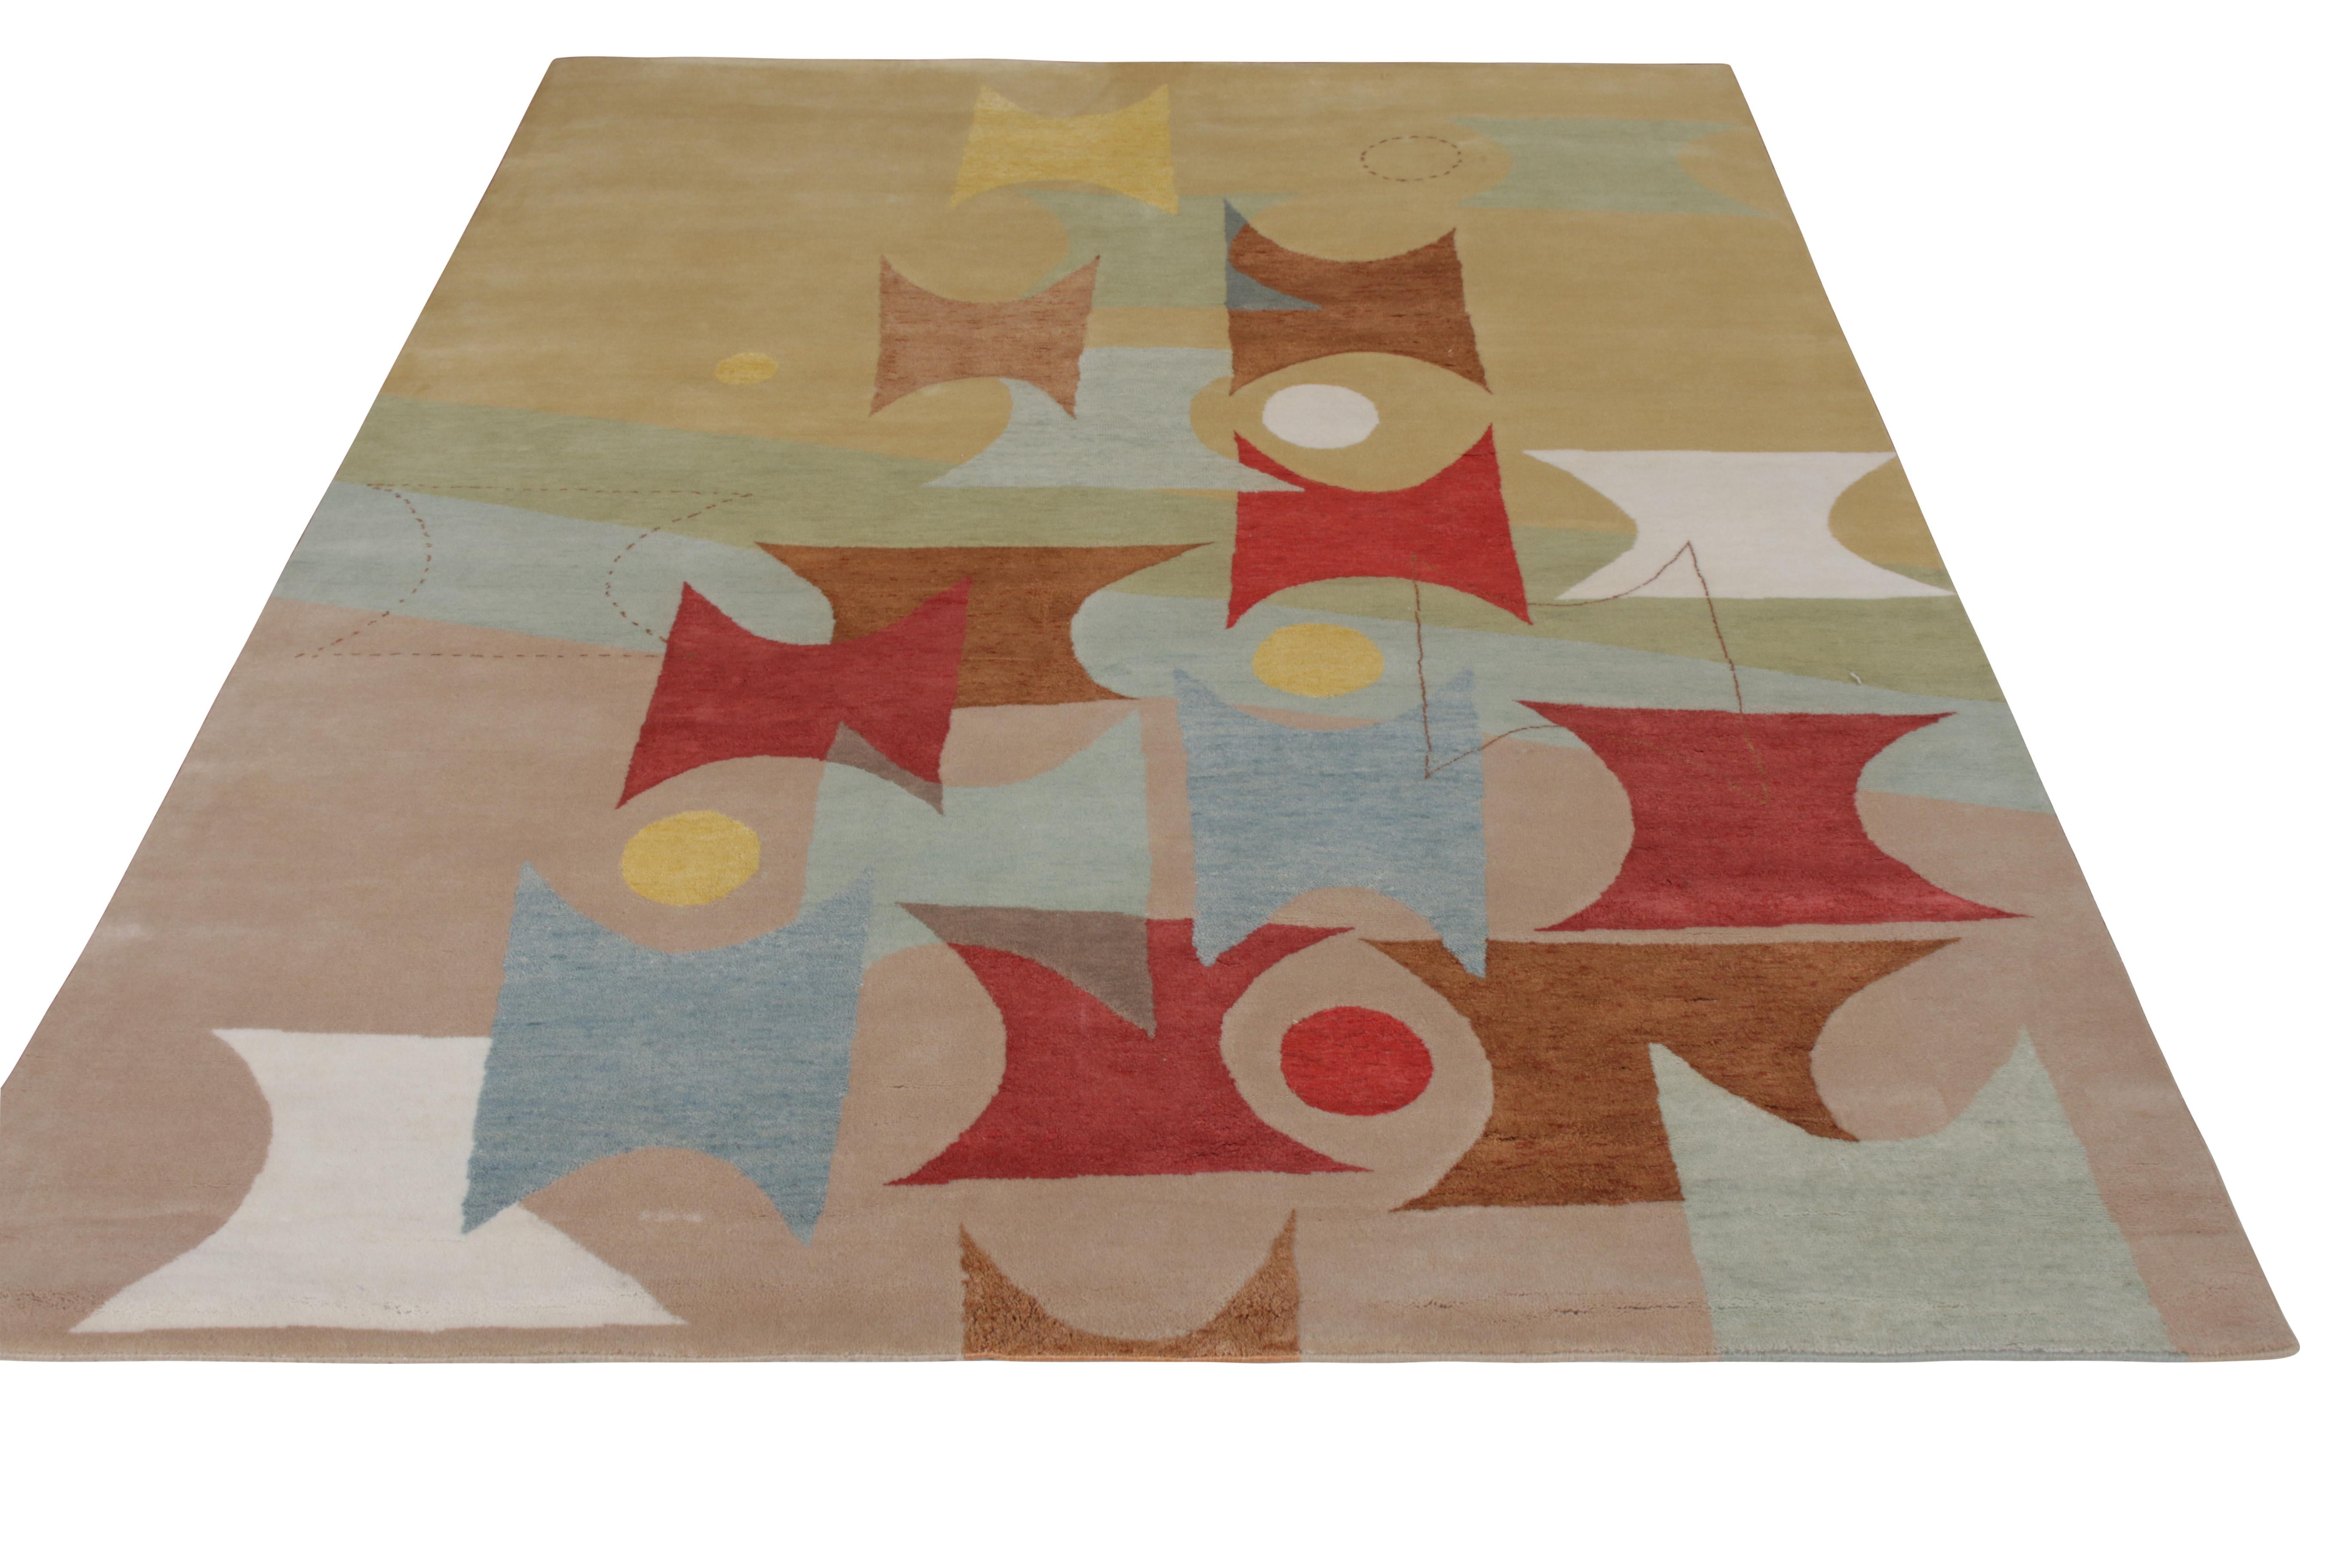 A 6x8 modern rug from Rug & Kilim’s bold Mid-Century Modern Collection, in collaboration with modern artist Jenn Ski. Hand knotted in wool and all-natural silk, exploring varied atomic age styles in playful distinction.

Further on the design: